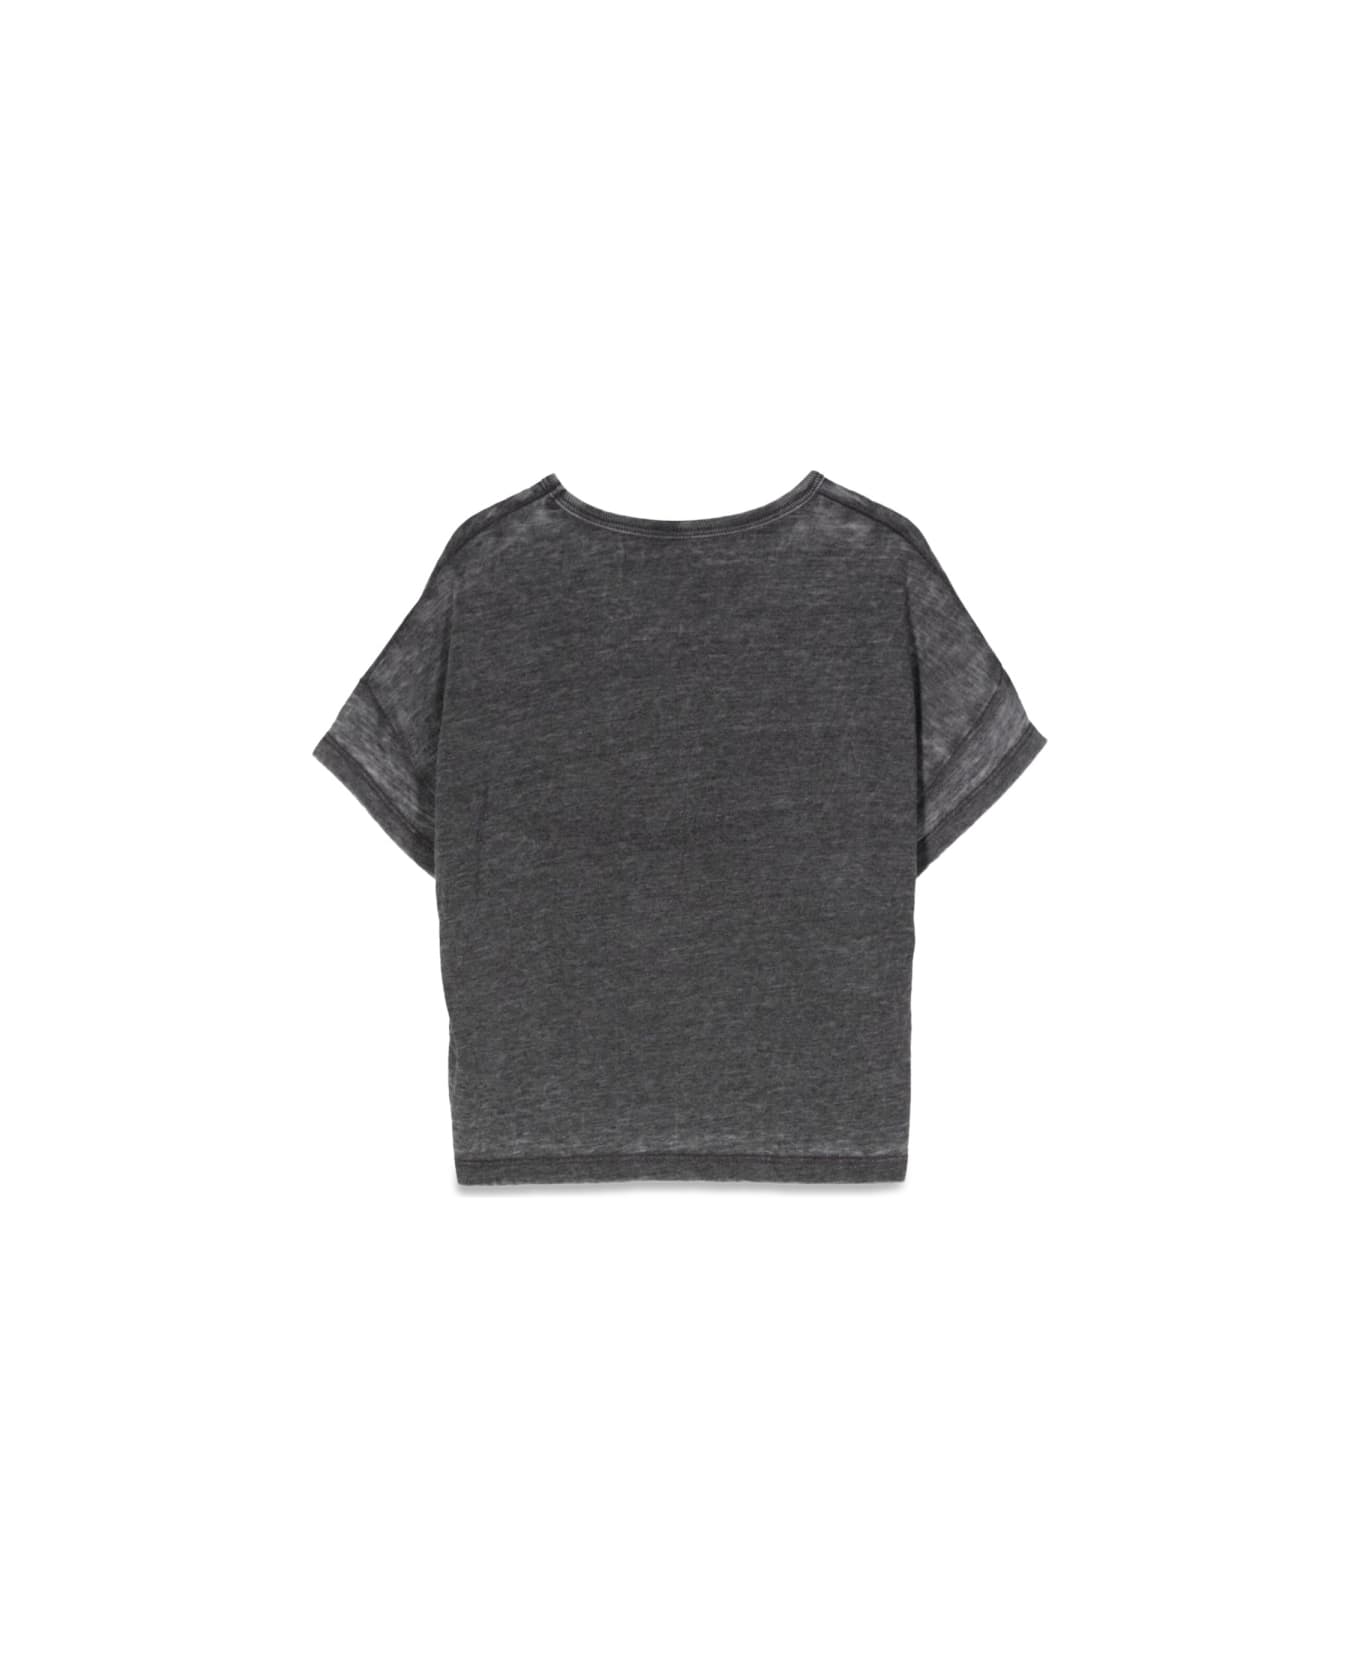 Zadig & Voltaire Short-sleeved T-shirt - GREY Tシャツ＆ポロシャツ